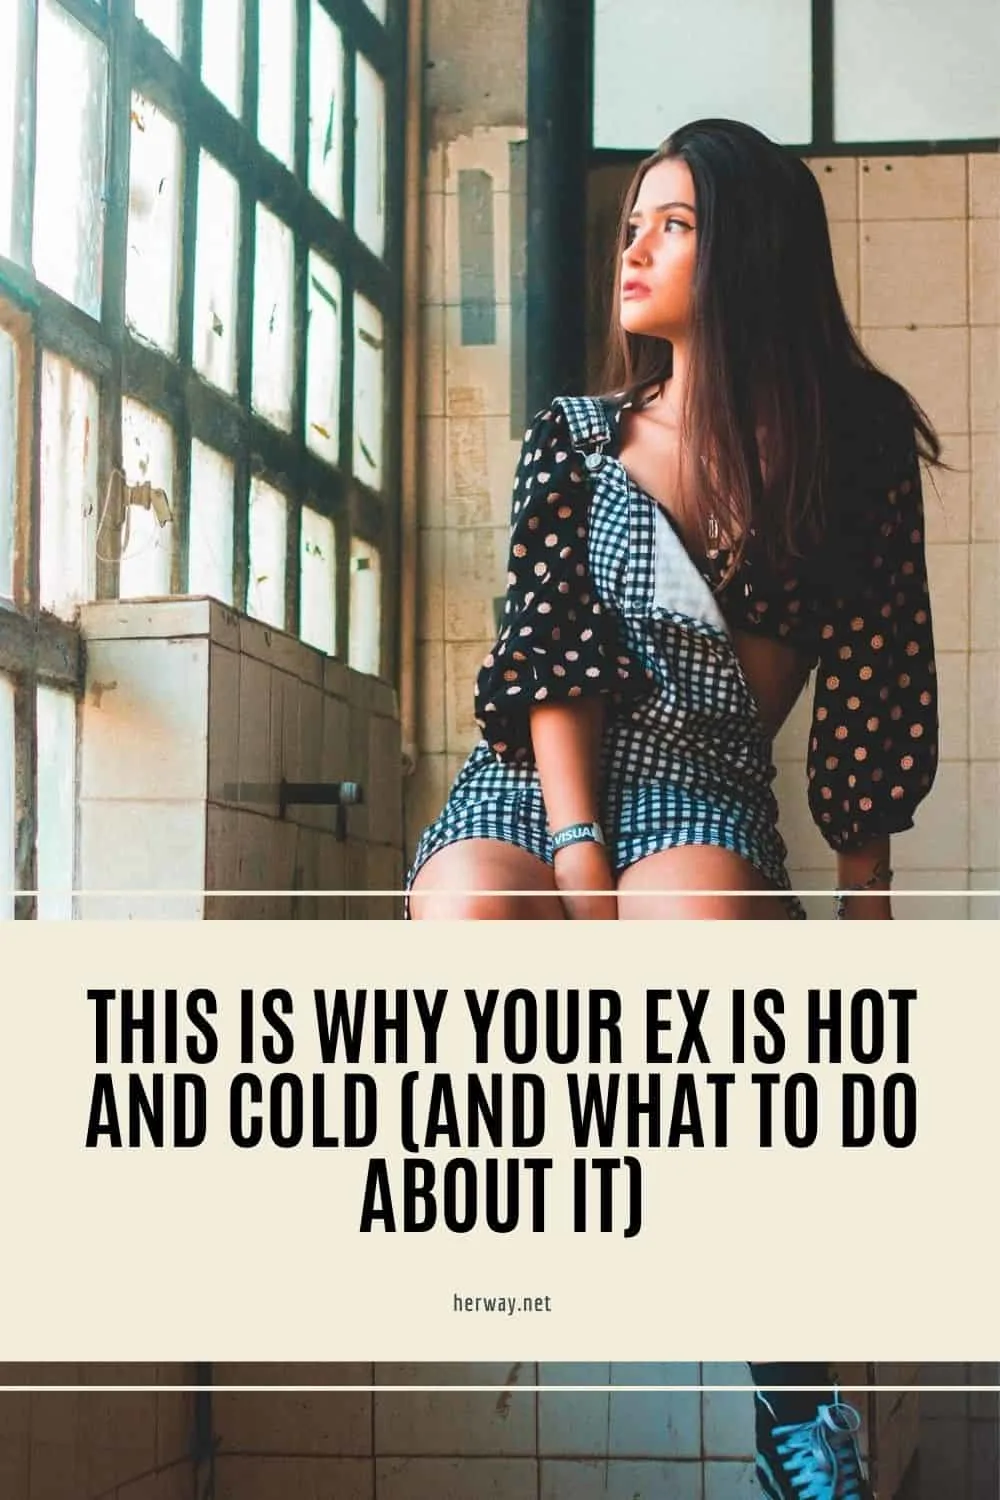 This Is Why Your Ex Is Hot And Cold (And What To Do About It)